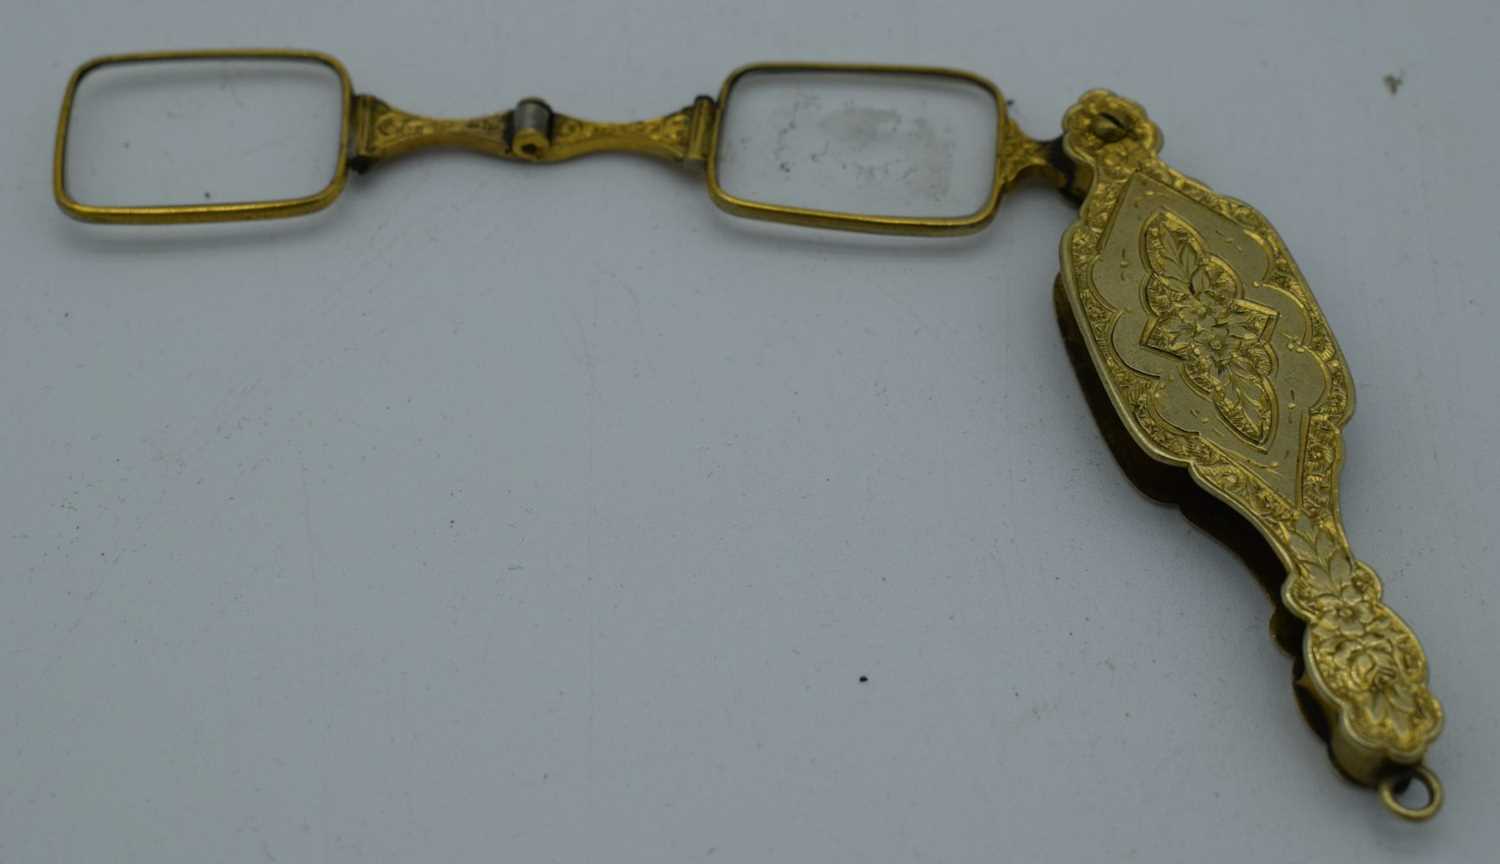 A FINE PAIR OF ANTIQUE YELLOW METAL LORGNETTES. 22 grams. 10 cm x 7.75 cm extended. - Image 2 of 3